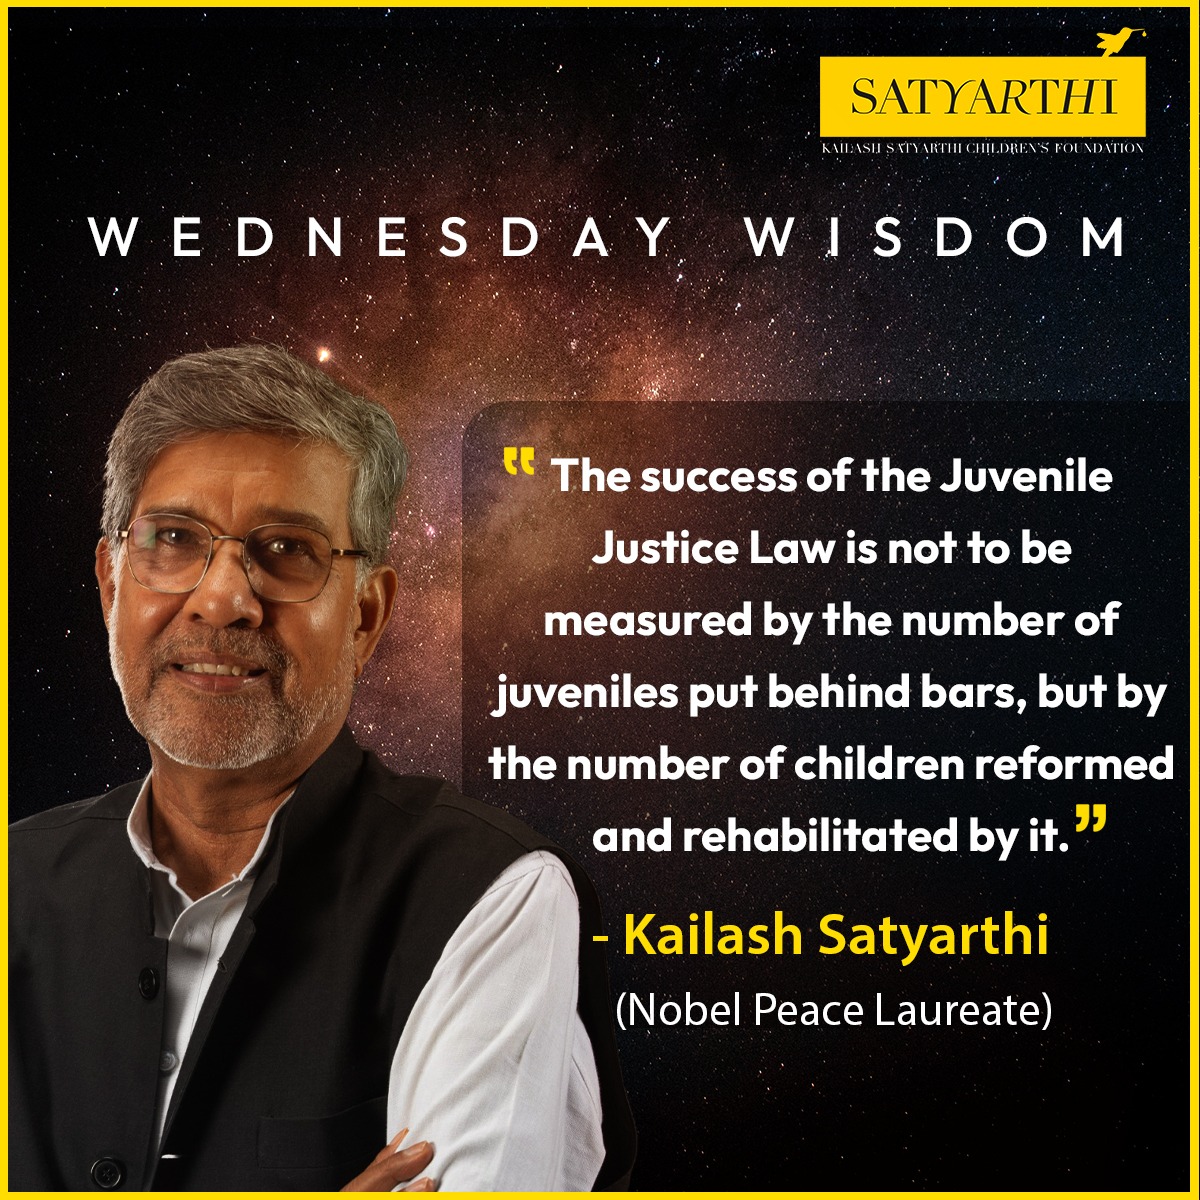 It is important to lead misguided children to the path of honesty, justice and compassion.
.
#wednesdaywisdom 
.
#childrights #childprotection #childfriendlynation #juvenilejustice #juvenile #rehabilitation #reformation #outcome #change